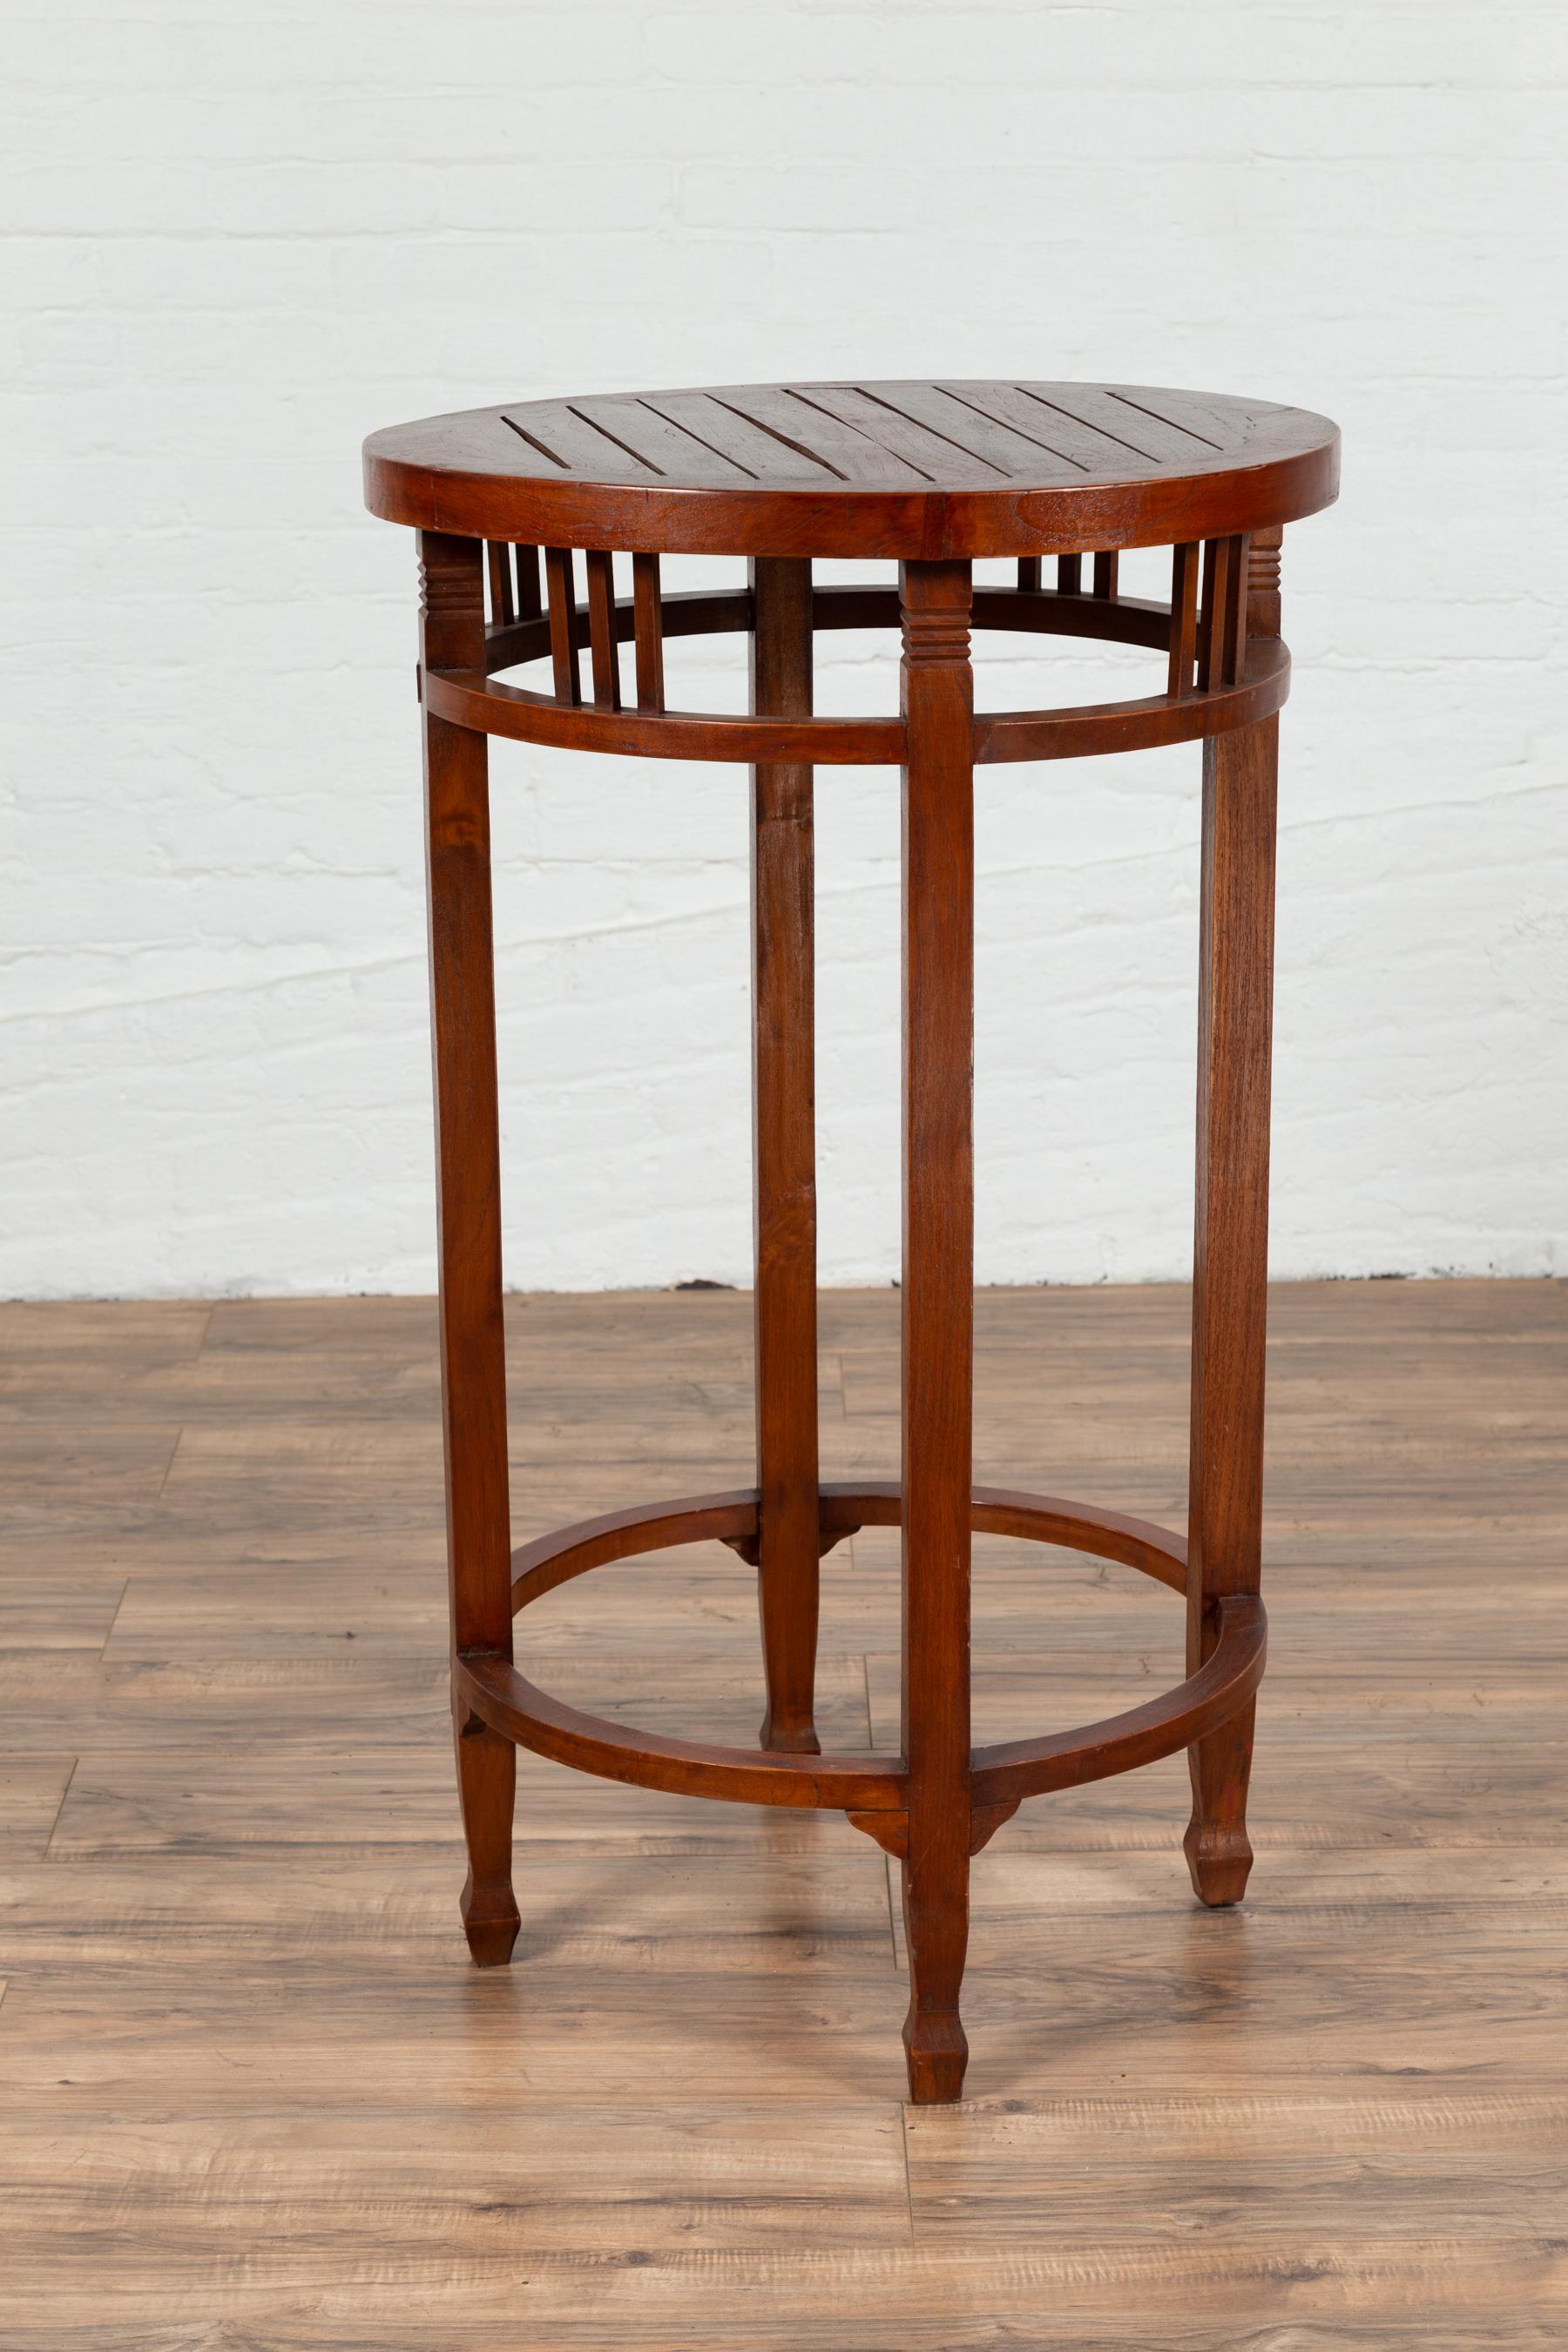 19th Century Indonesian Round Pedestal Table with Pierced Apron and Stretchers For Sale 3